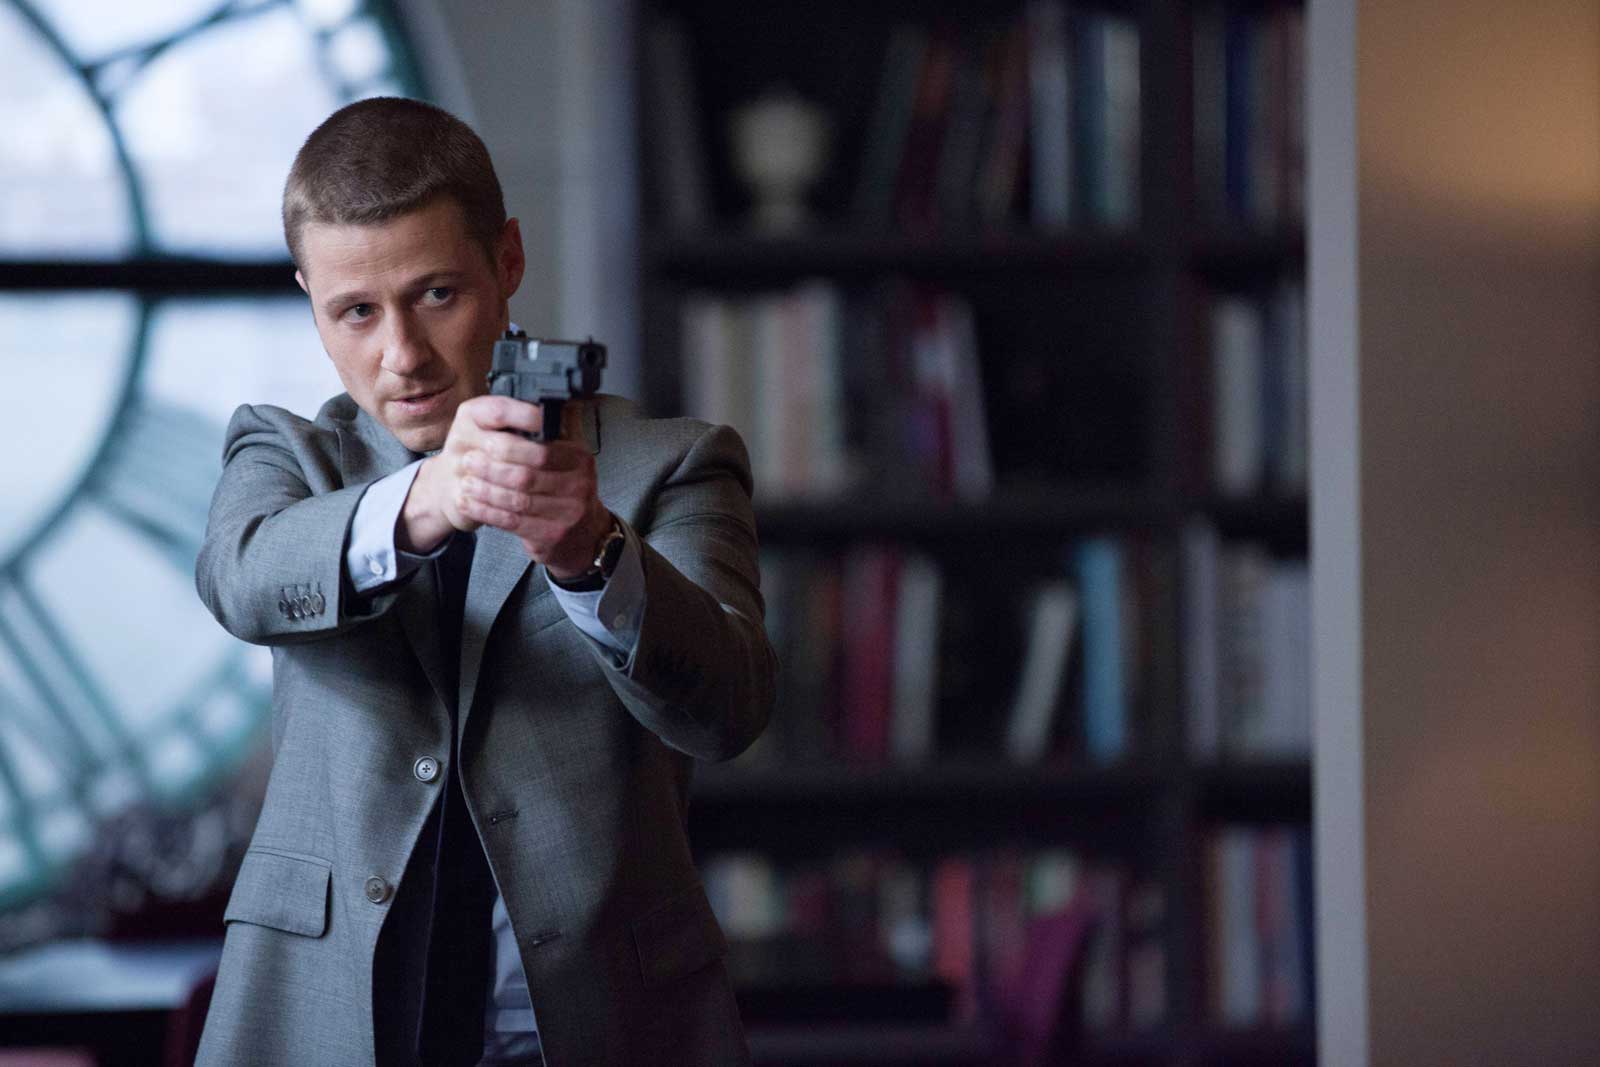 Ben McKenzie as Detective James Gordon in Gotham - "The Penguin's Umbrella" Image Provided by Channel 5.